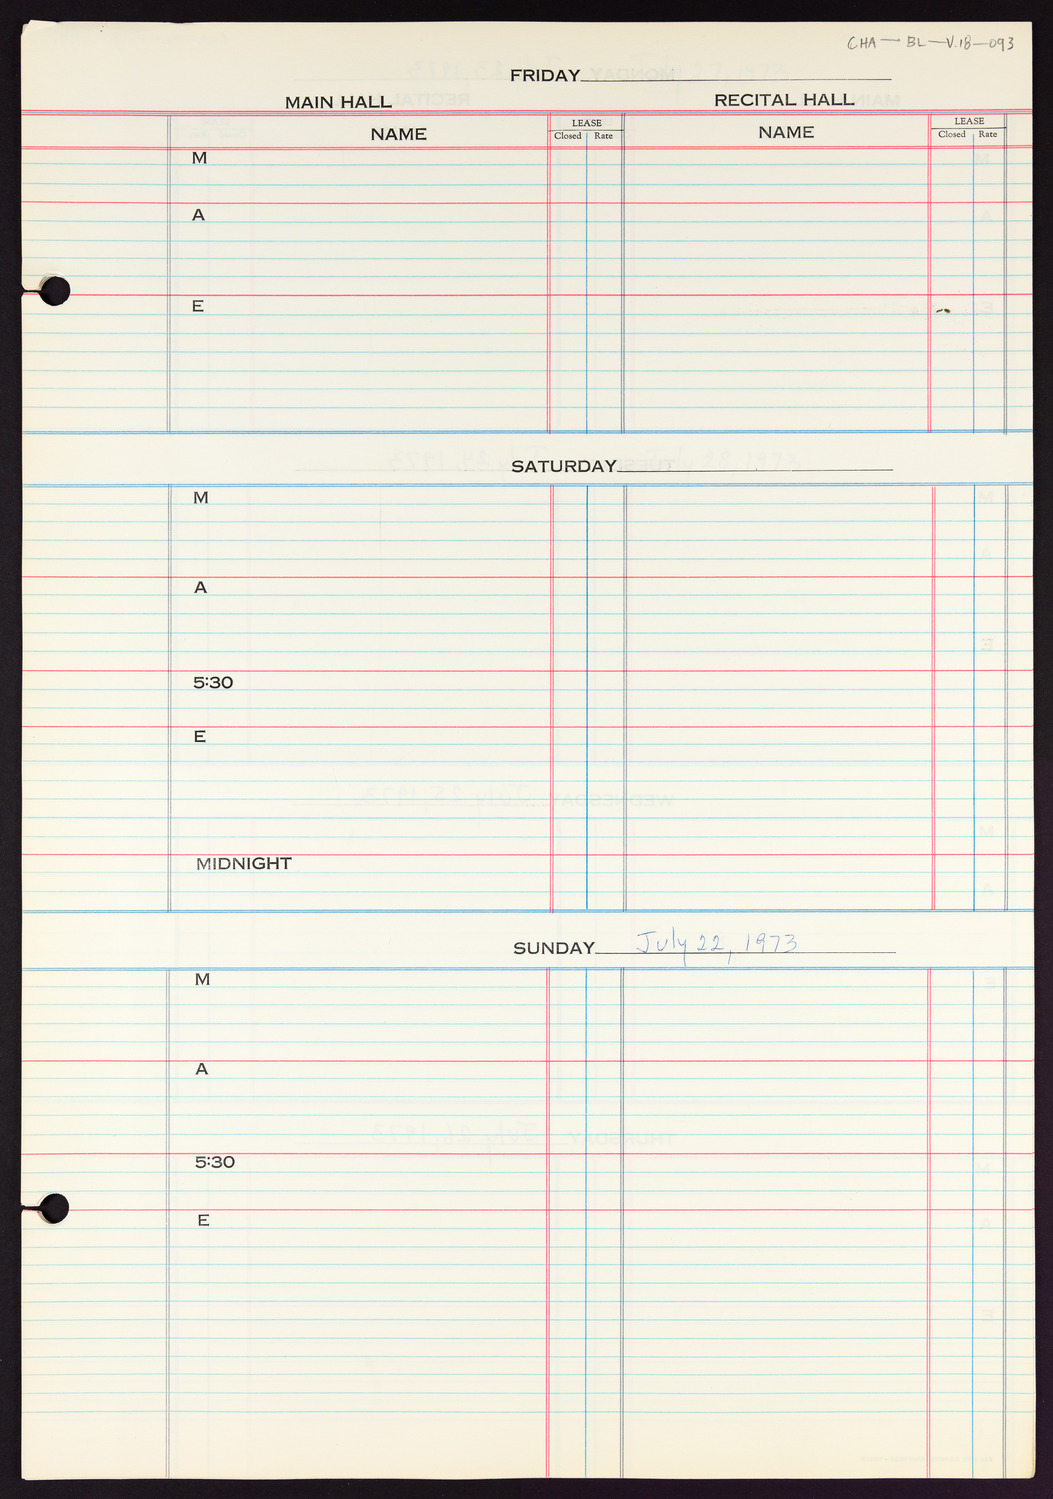 Carnegie Hall Booking Ledger, volume 18, page 93